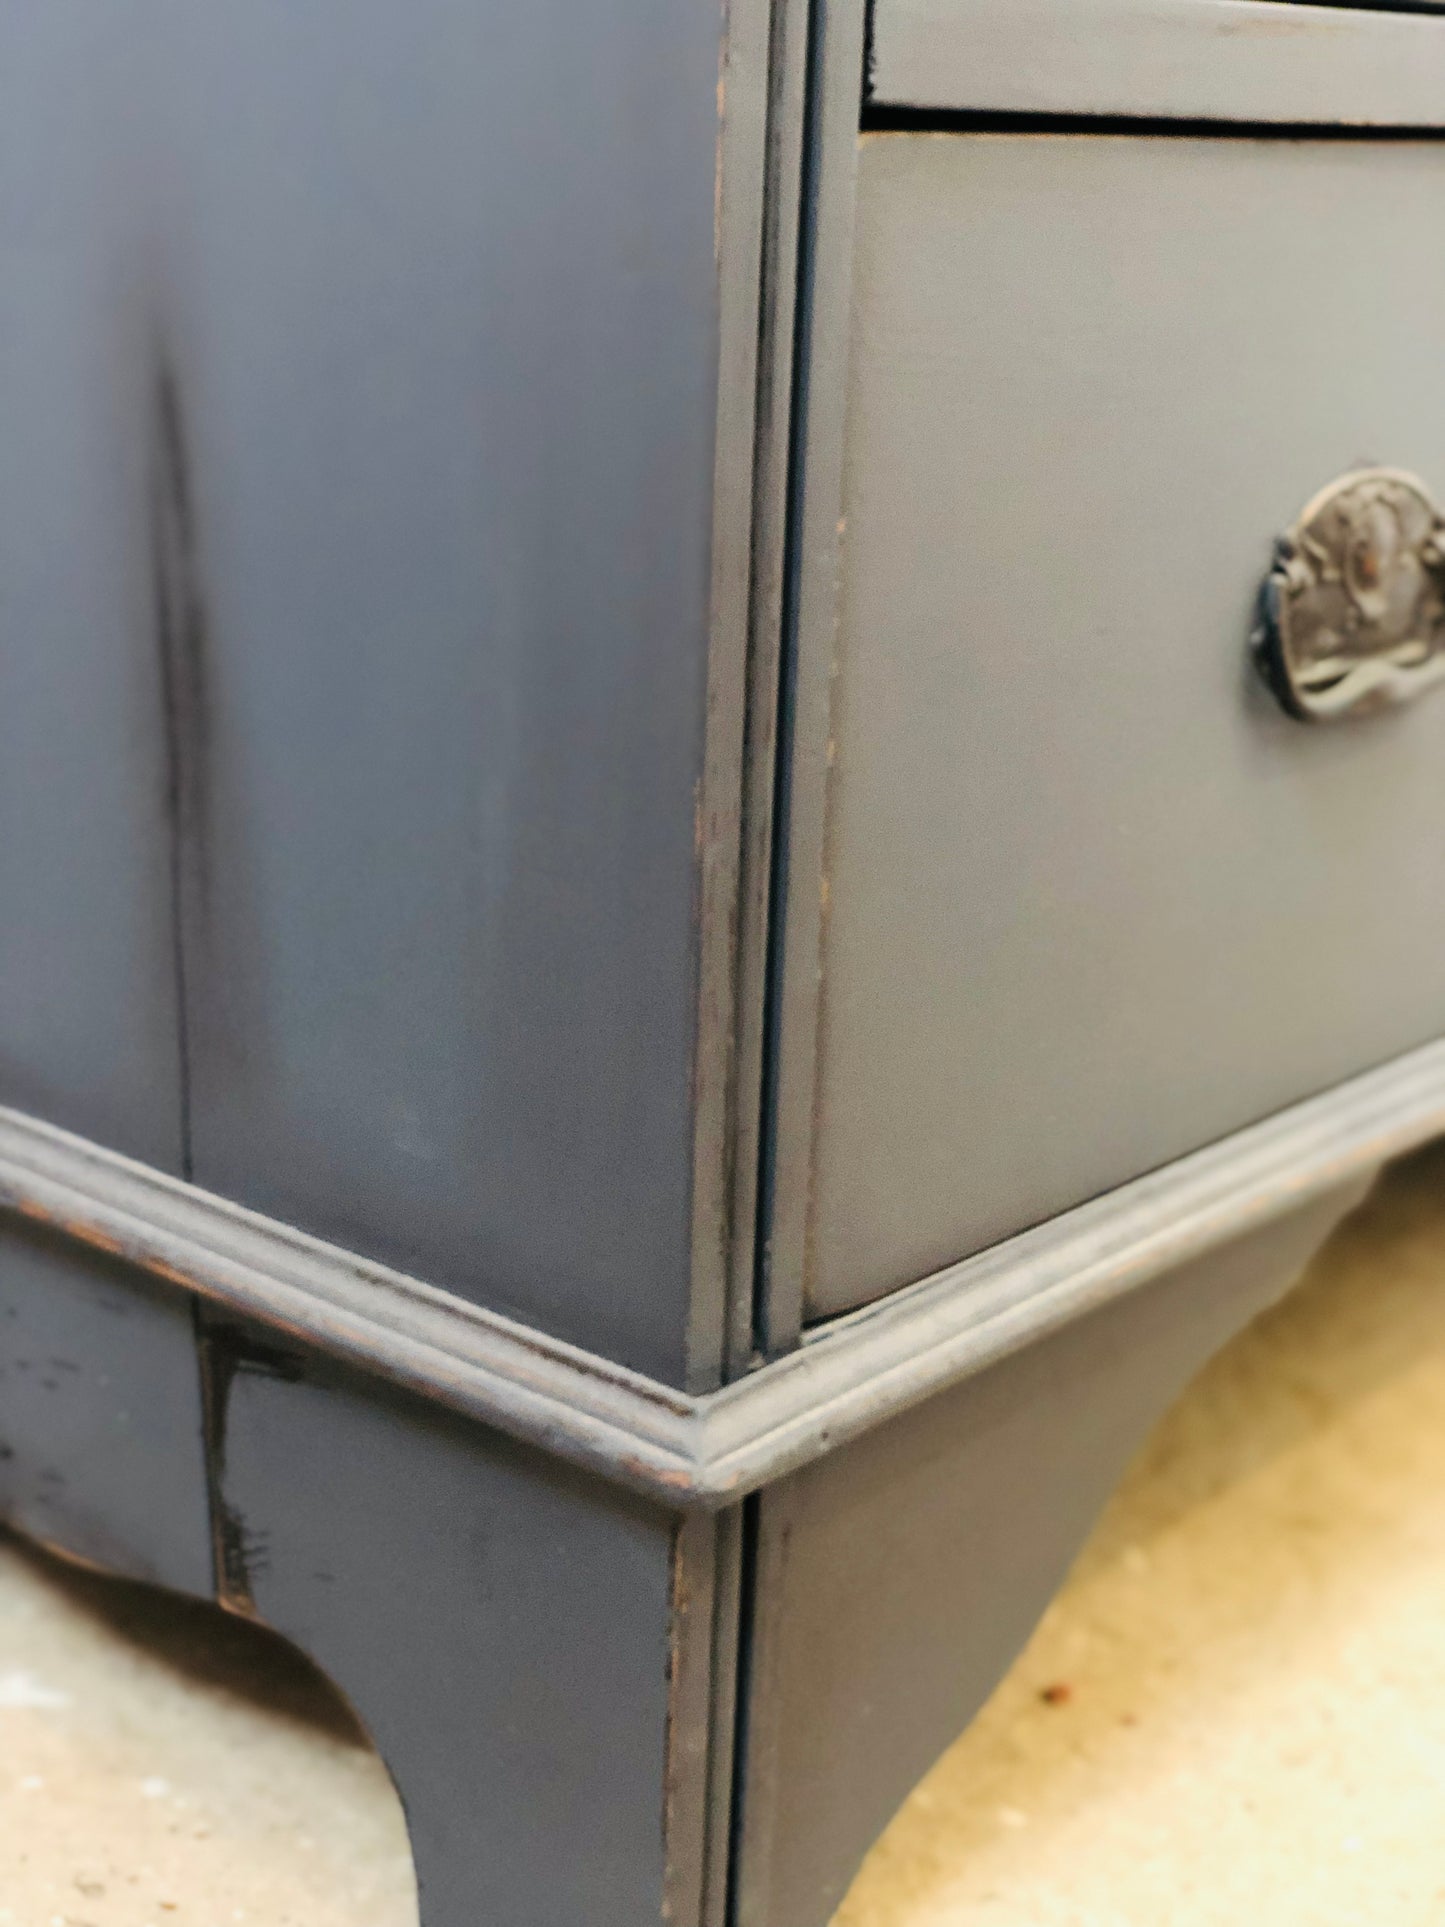 Vintage solid wood chest of drawers, painted dark grey, with distressed detail, rustic style furniture